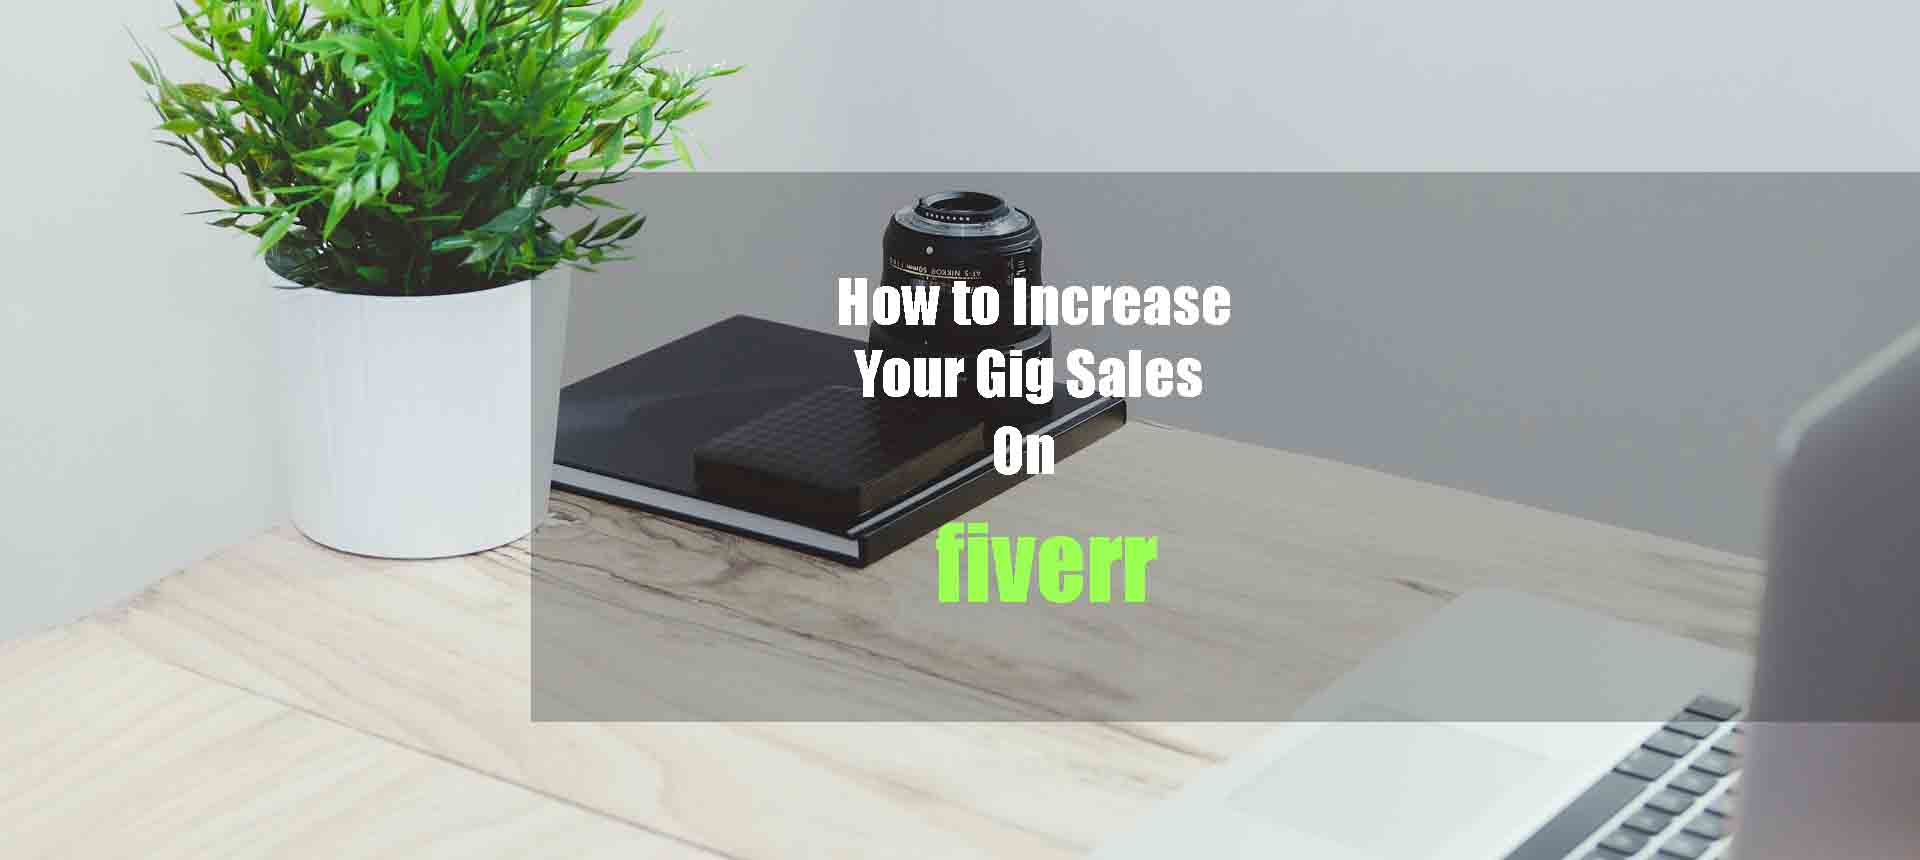 How to increase your gig sales on Fiverr